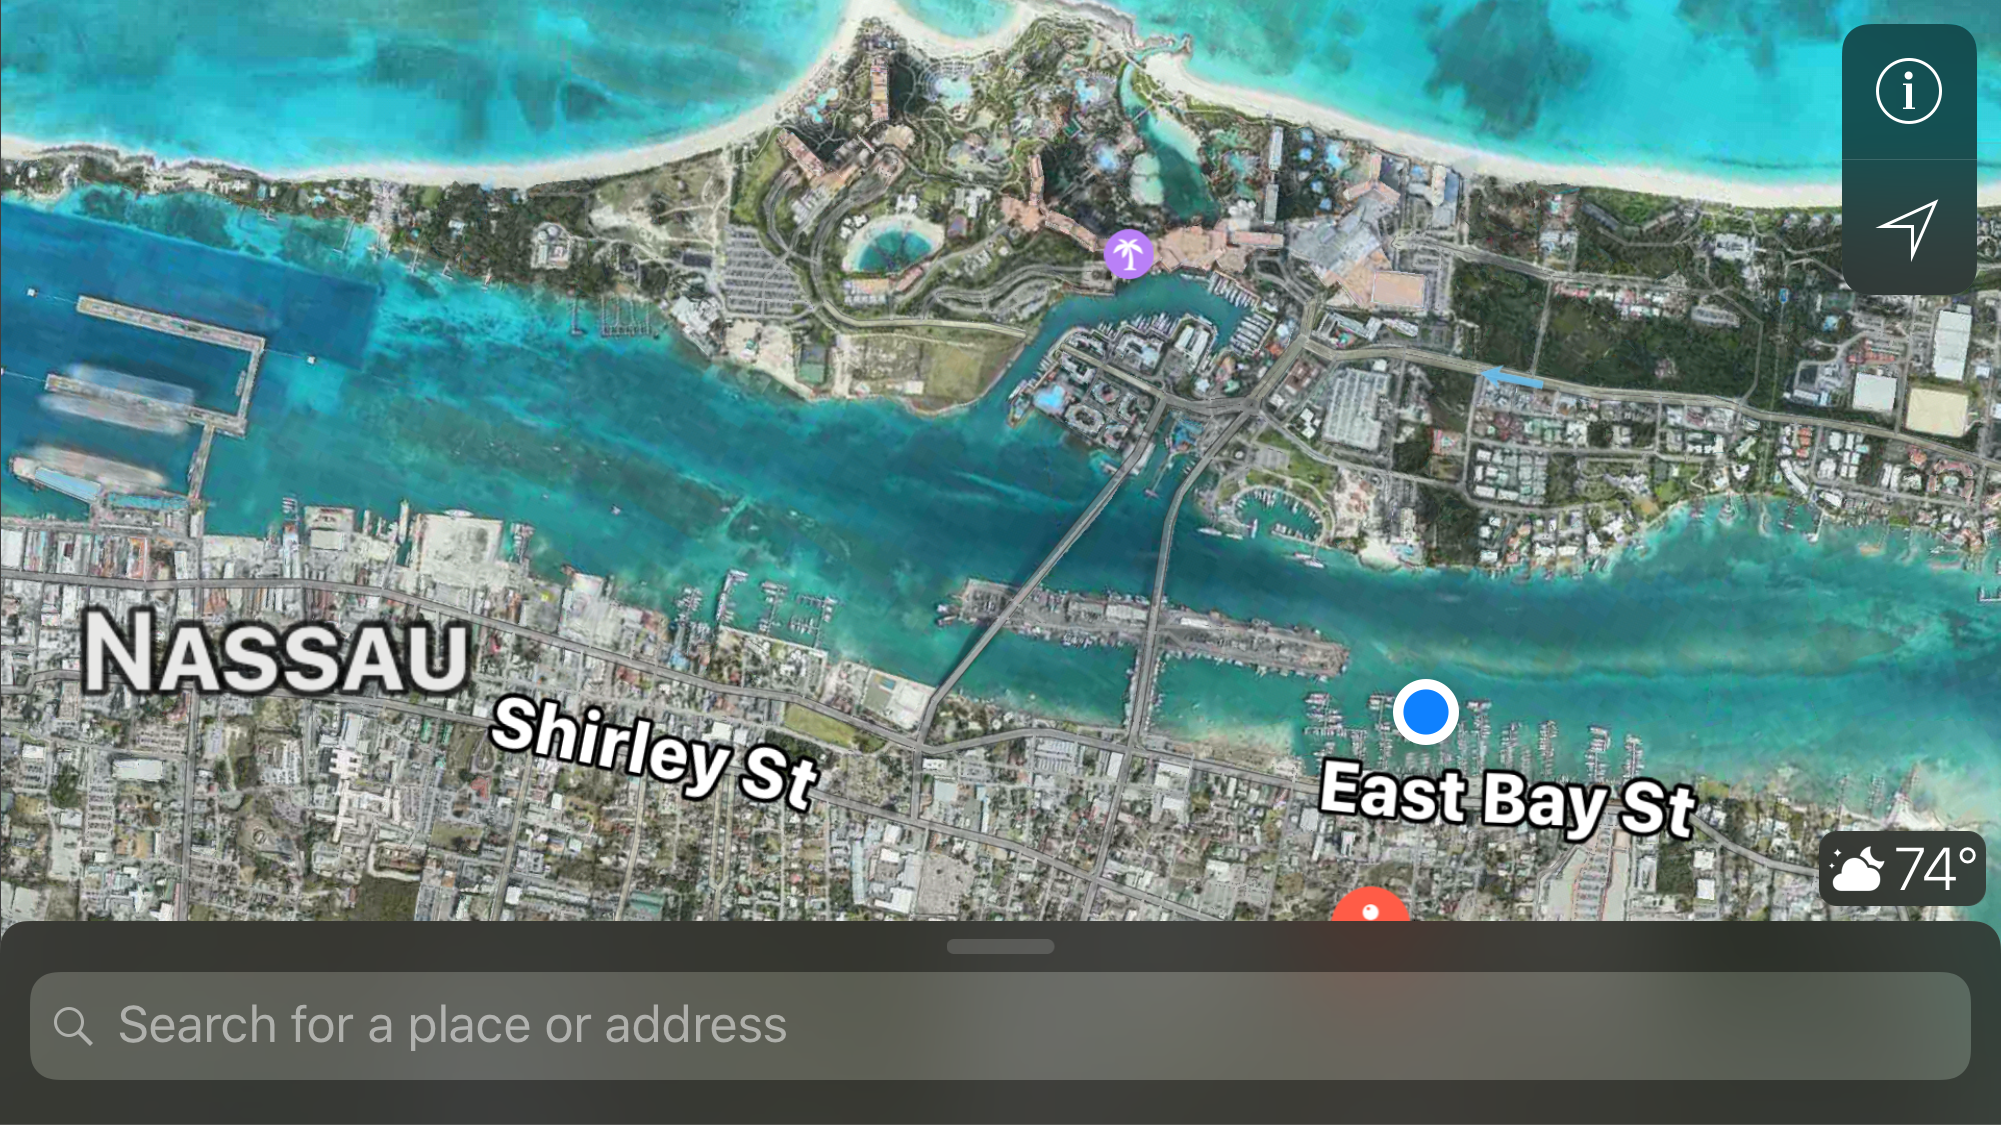 Our location in Nassau. to the north is Paradise Island. To the west are the cruise ship and downtown